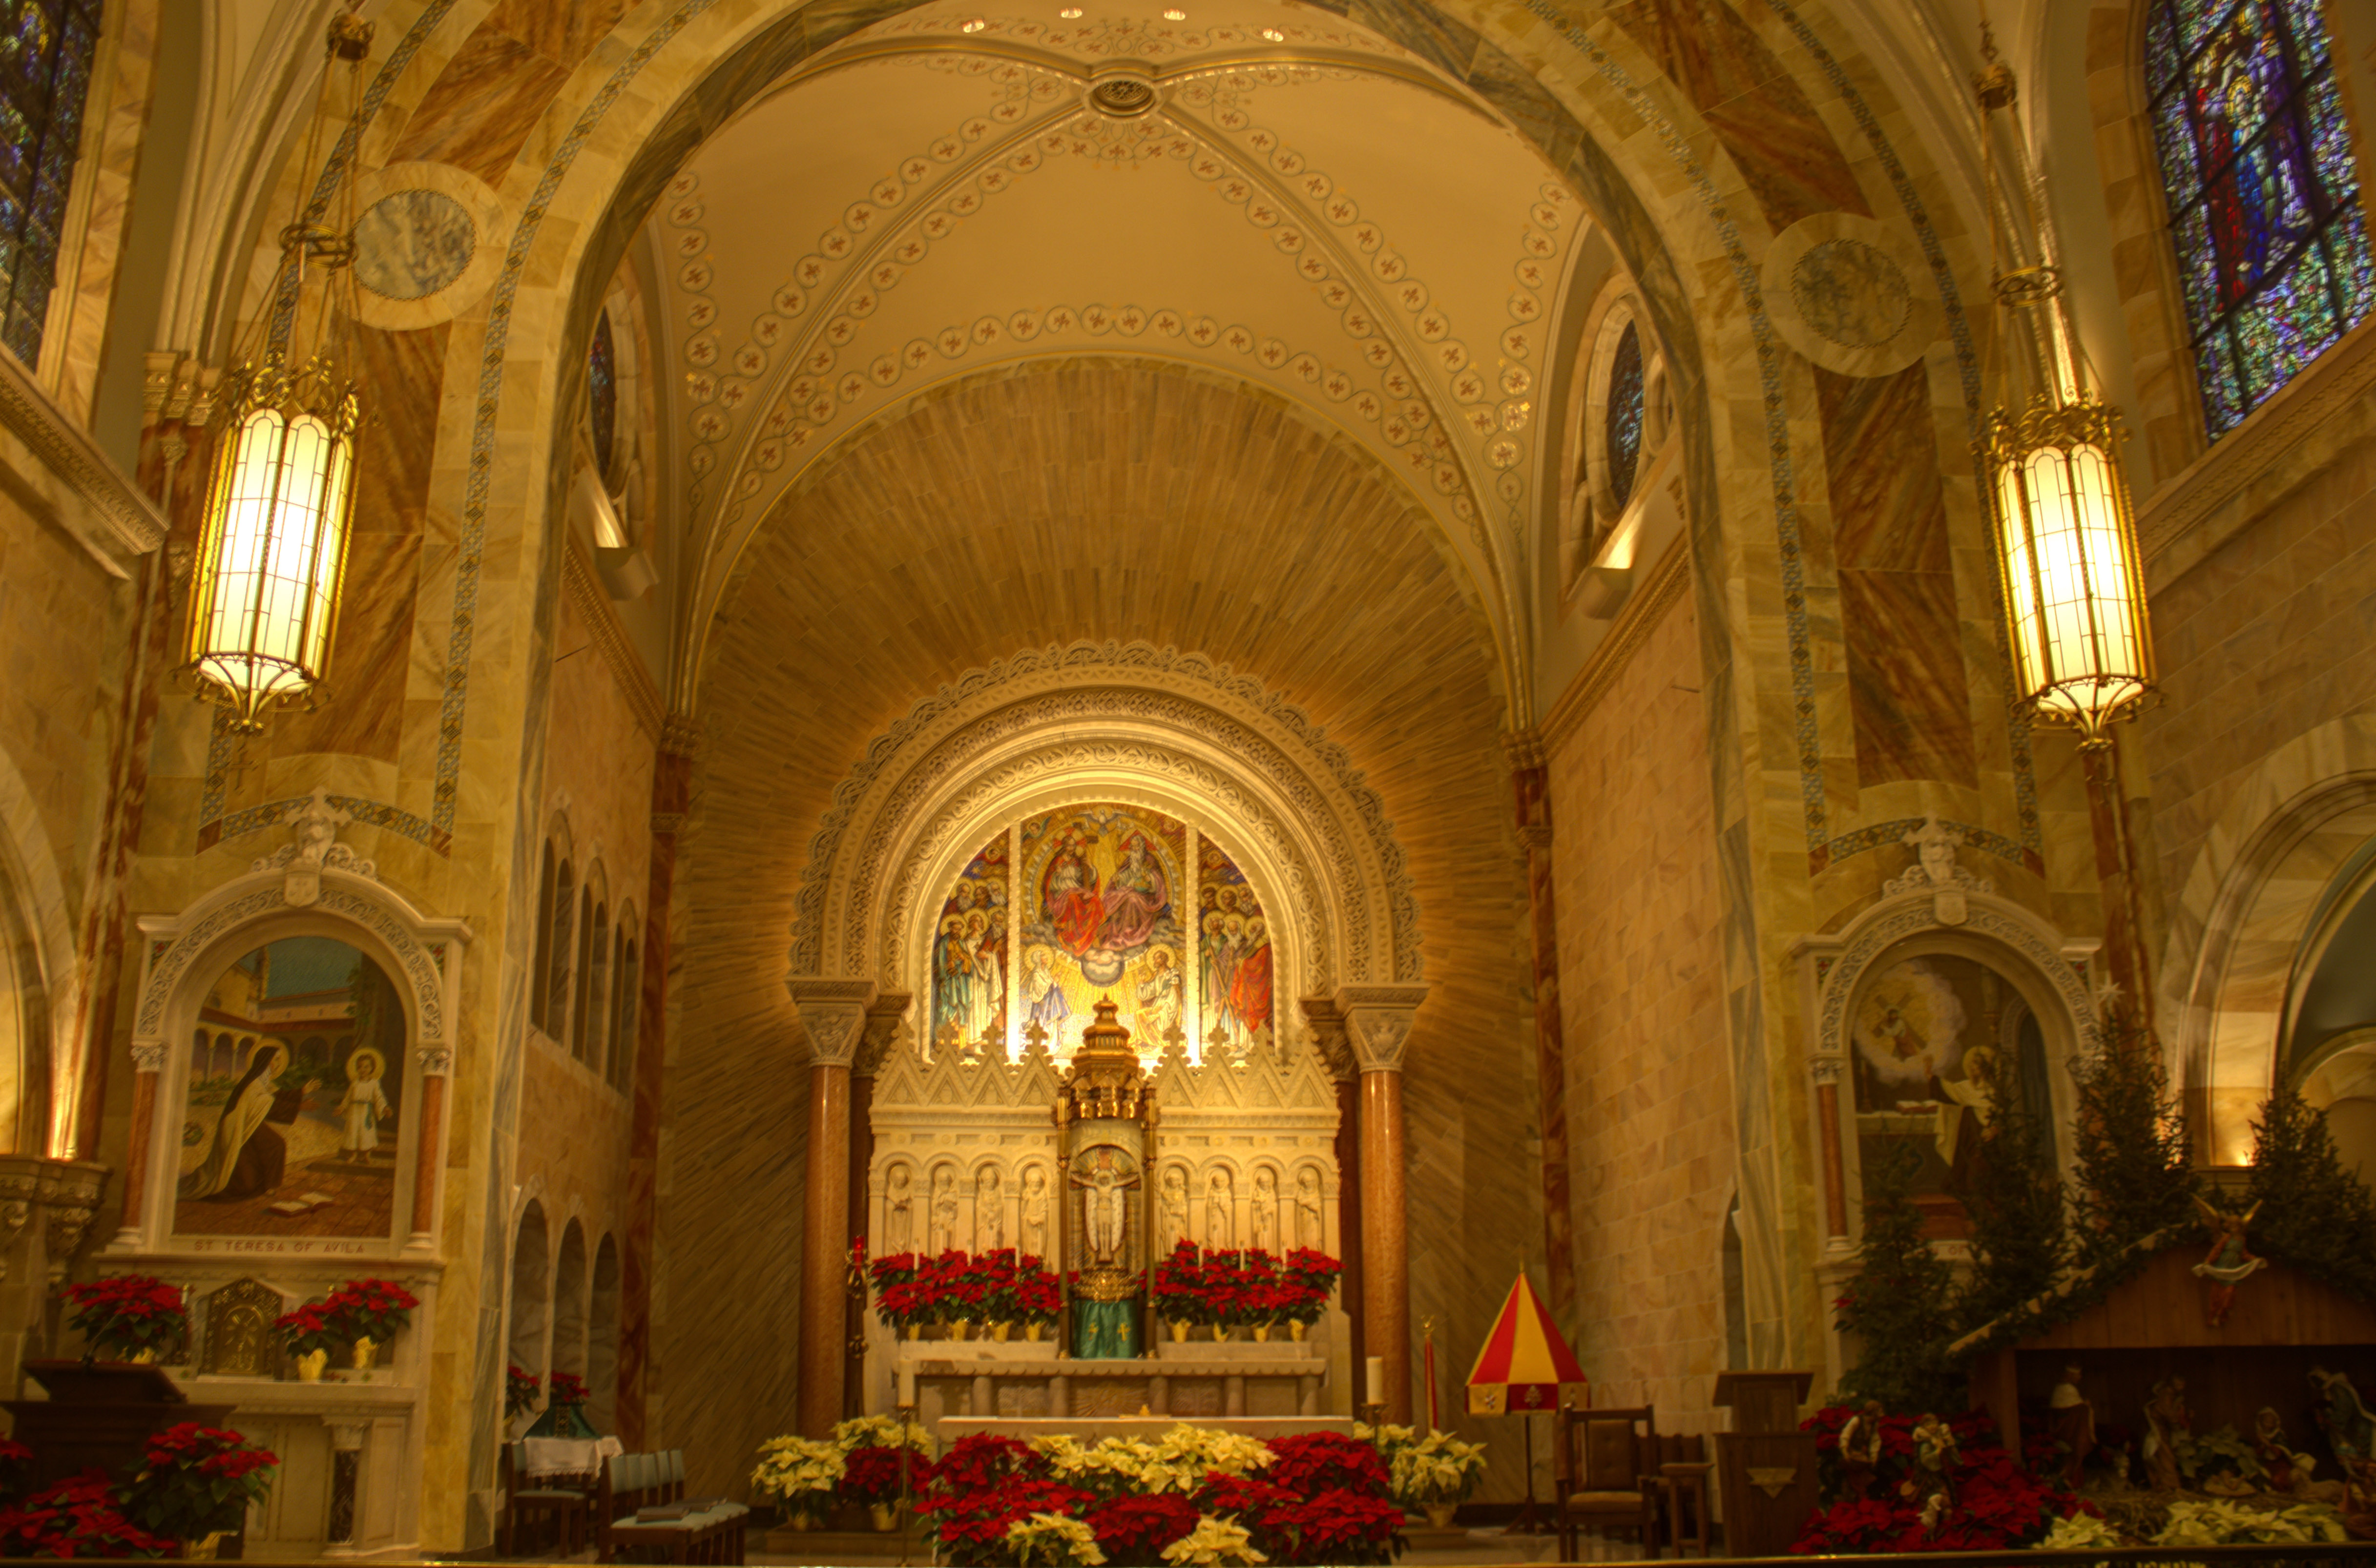 Inside the Basilica at Holy Hill, Wisconsin image - Free stock photo